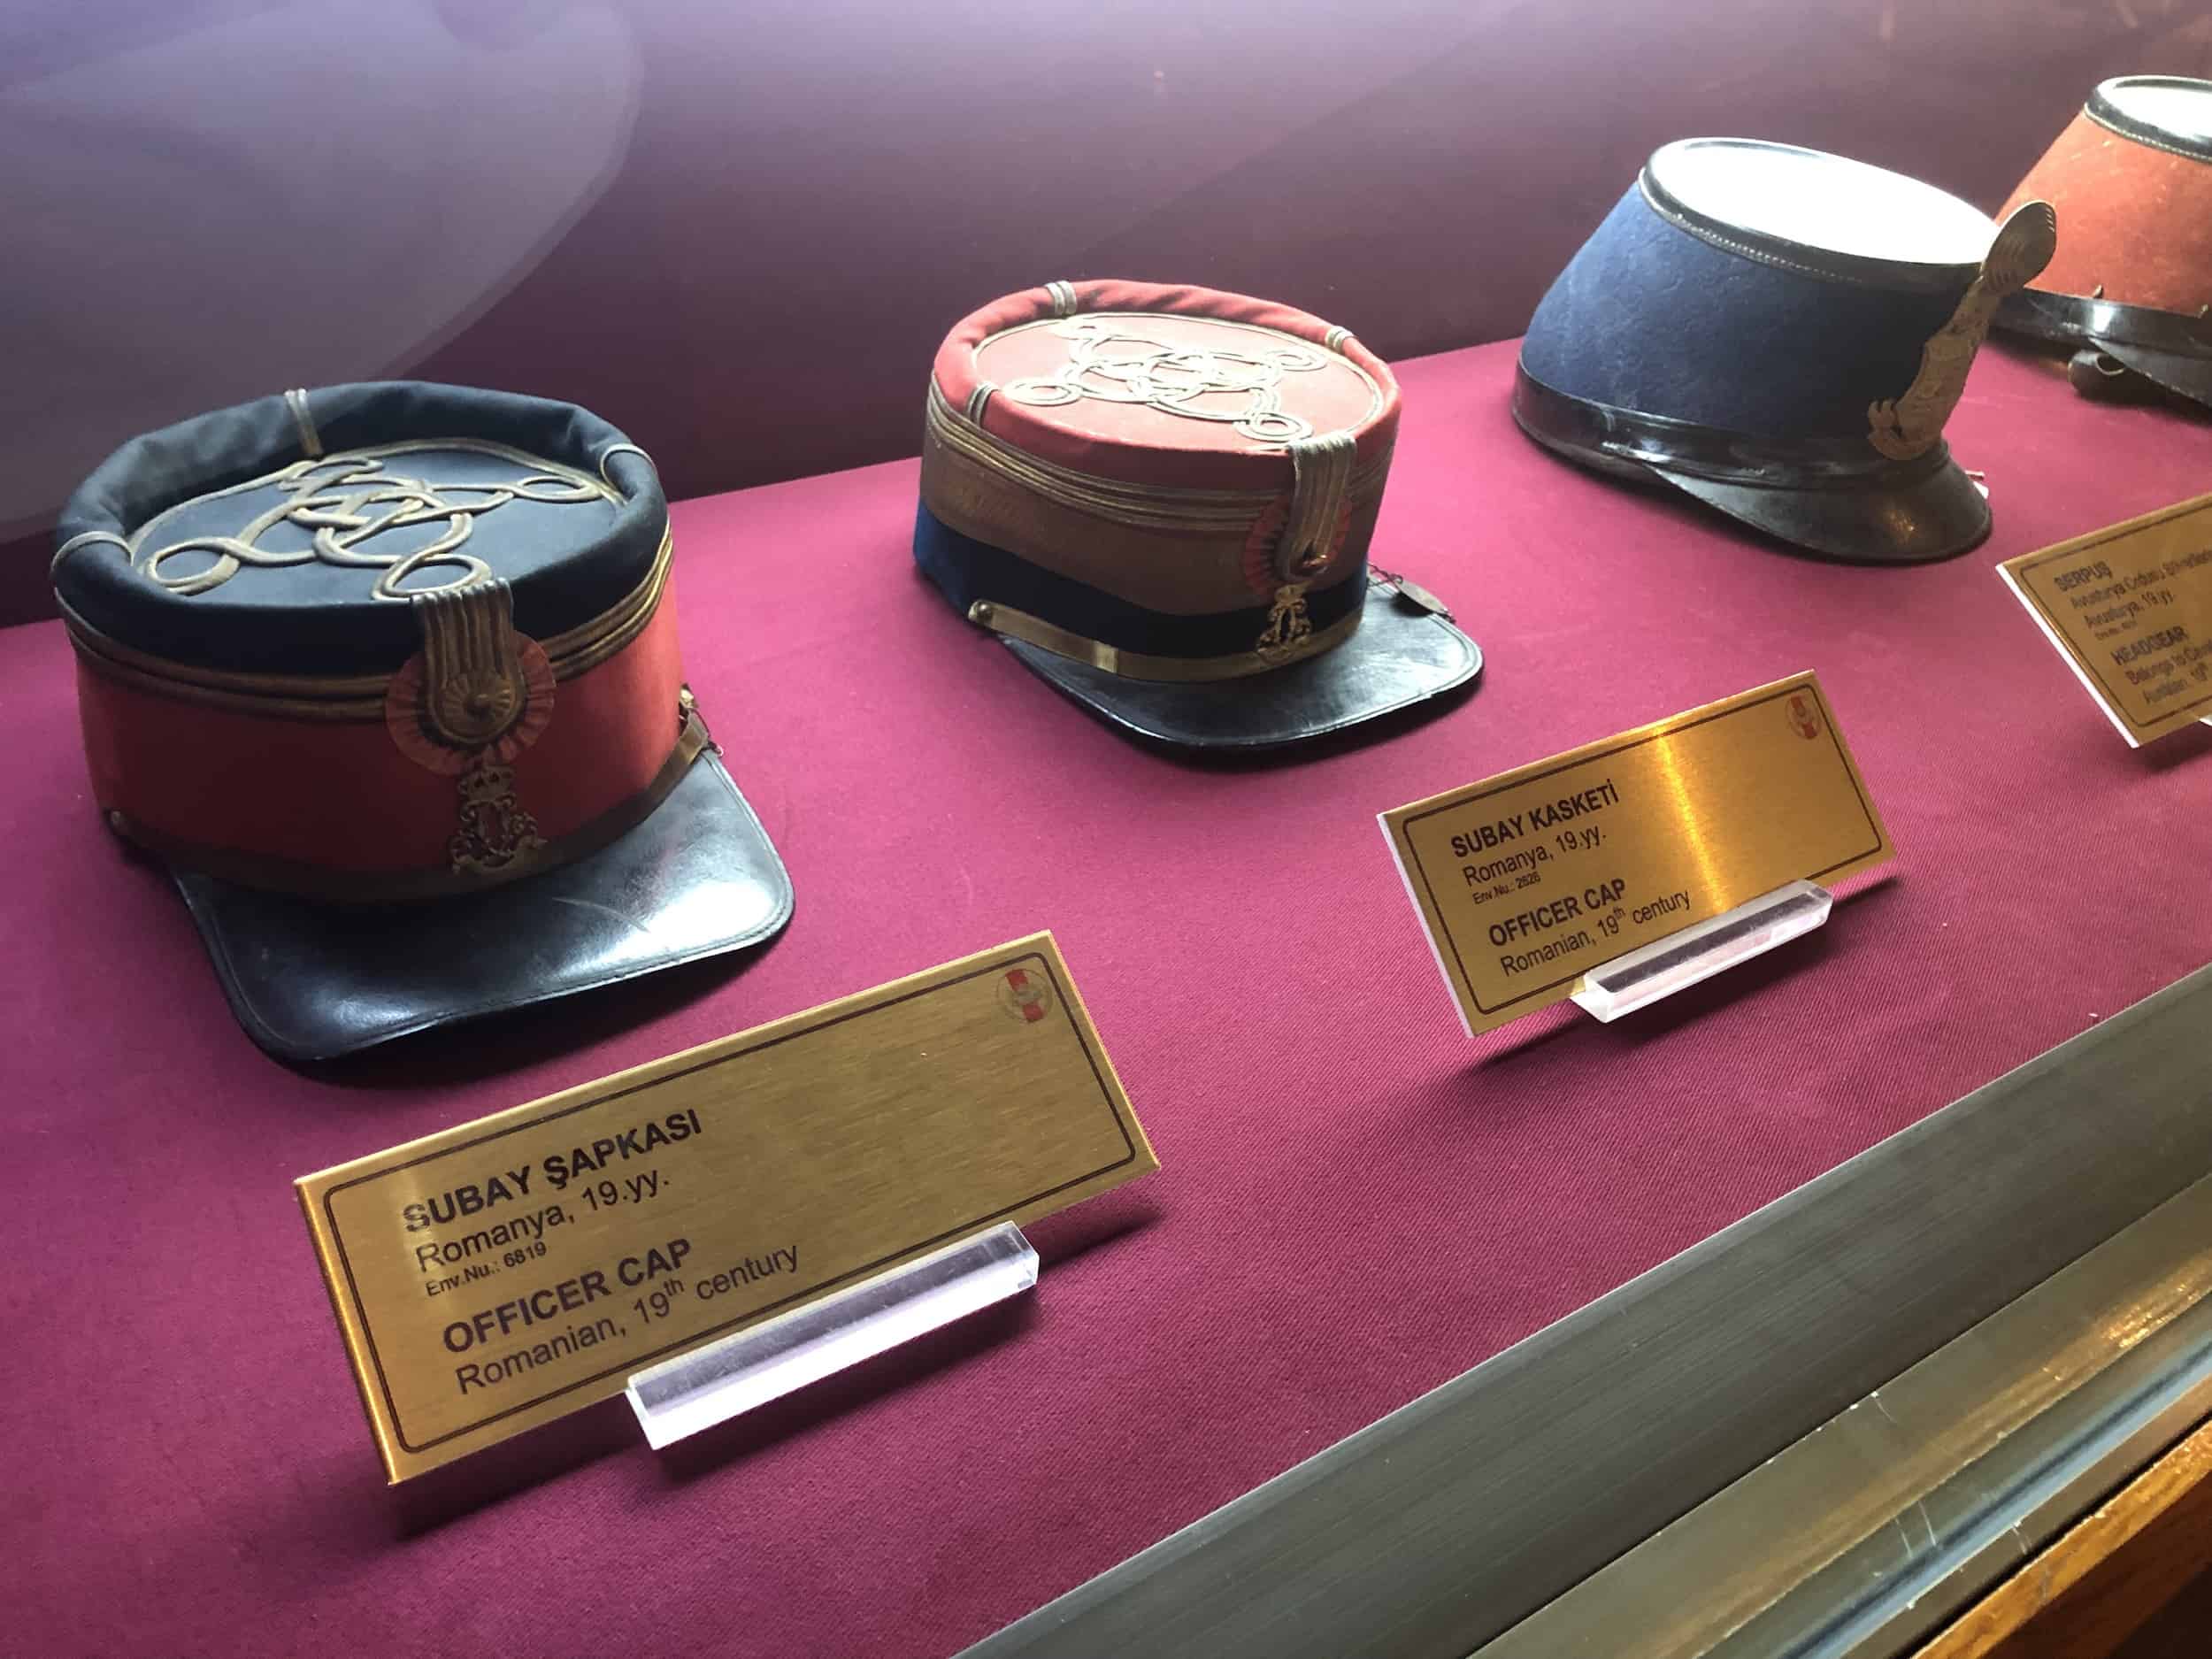 19th century Romanian officer's caps in the Constitutional Period Hall at the Harbiye Military Museum in Istanbul, Turkey